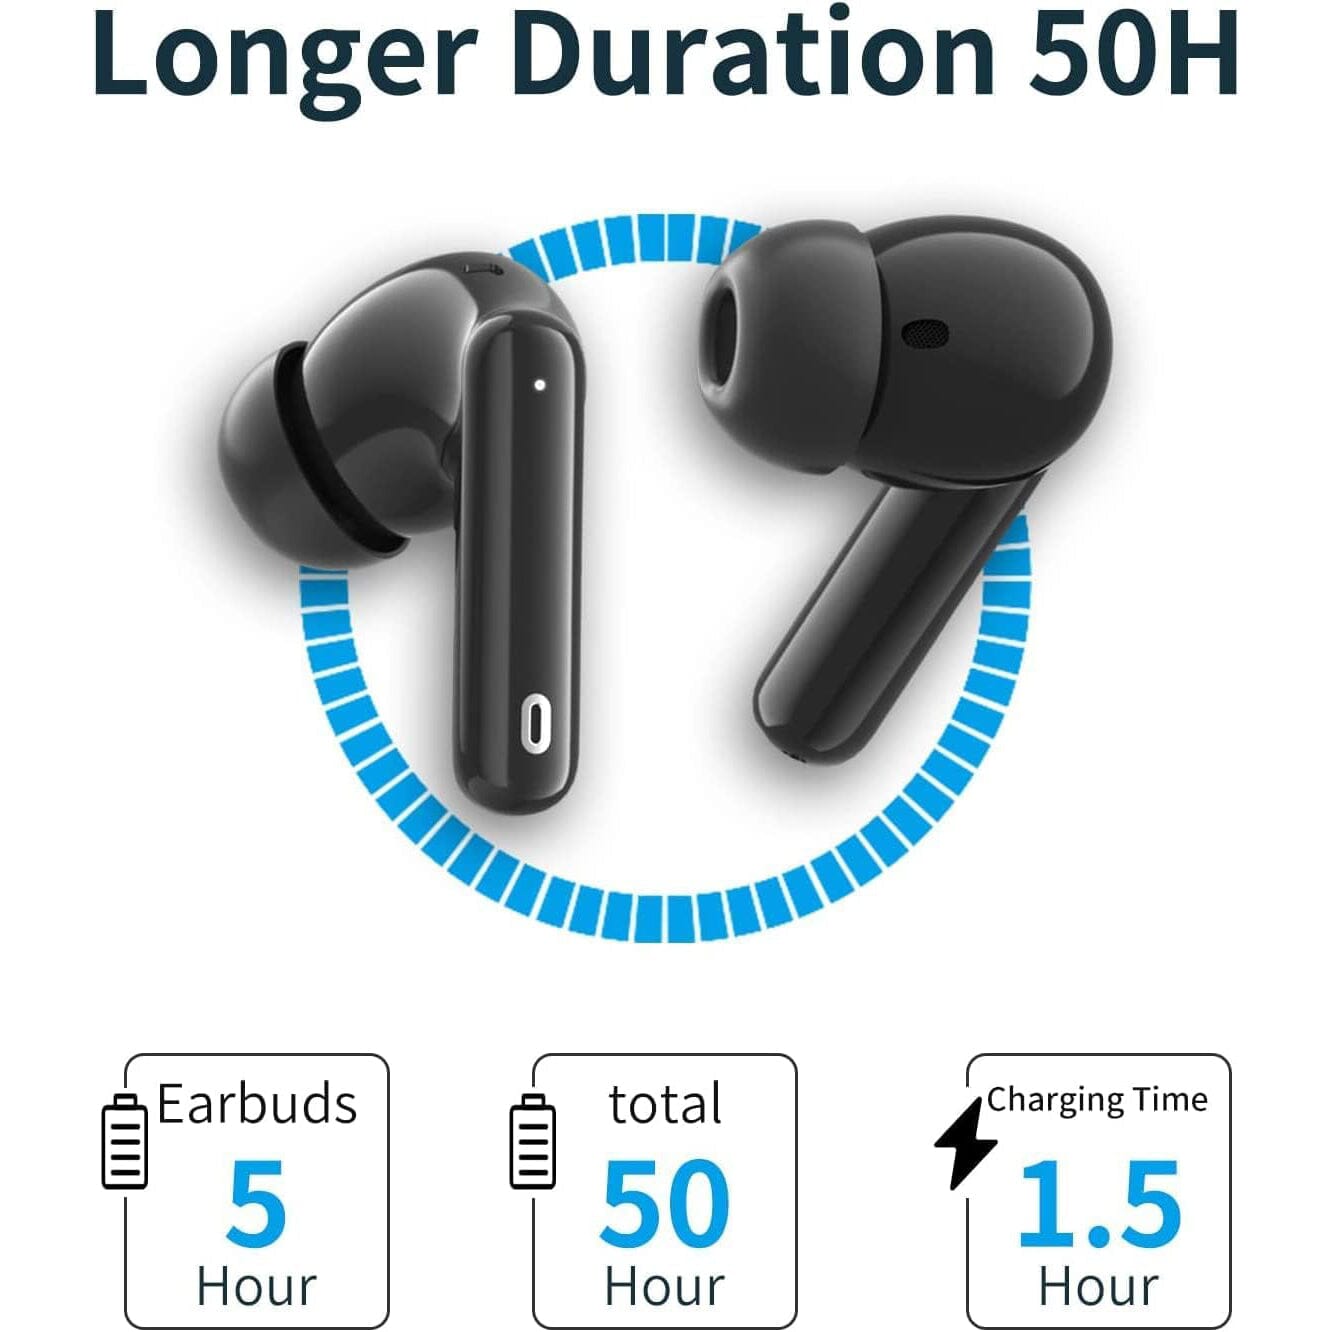 A40 Pro Wireless Earbuds (Refurbished)